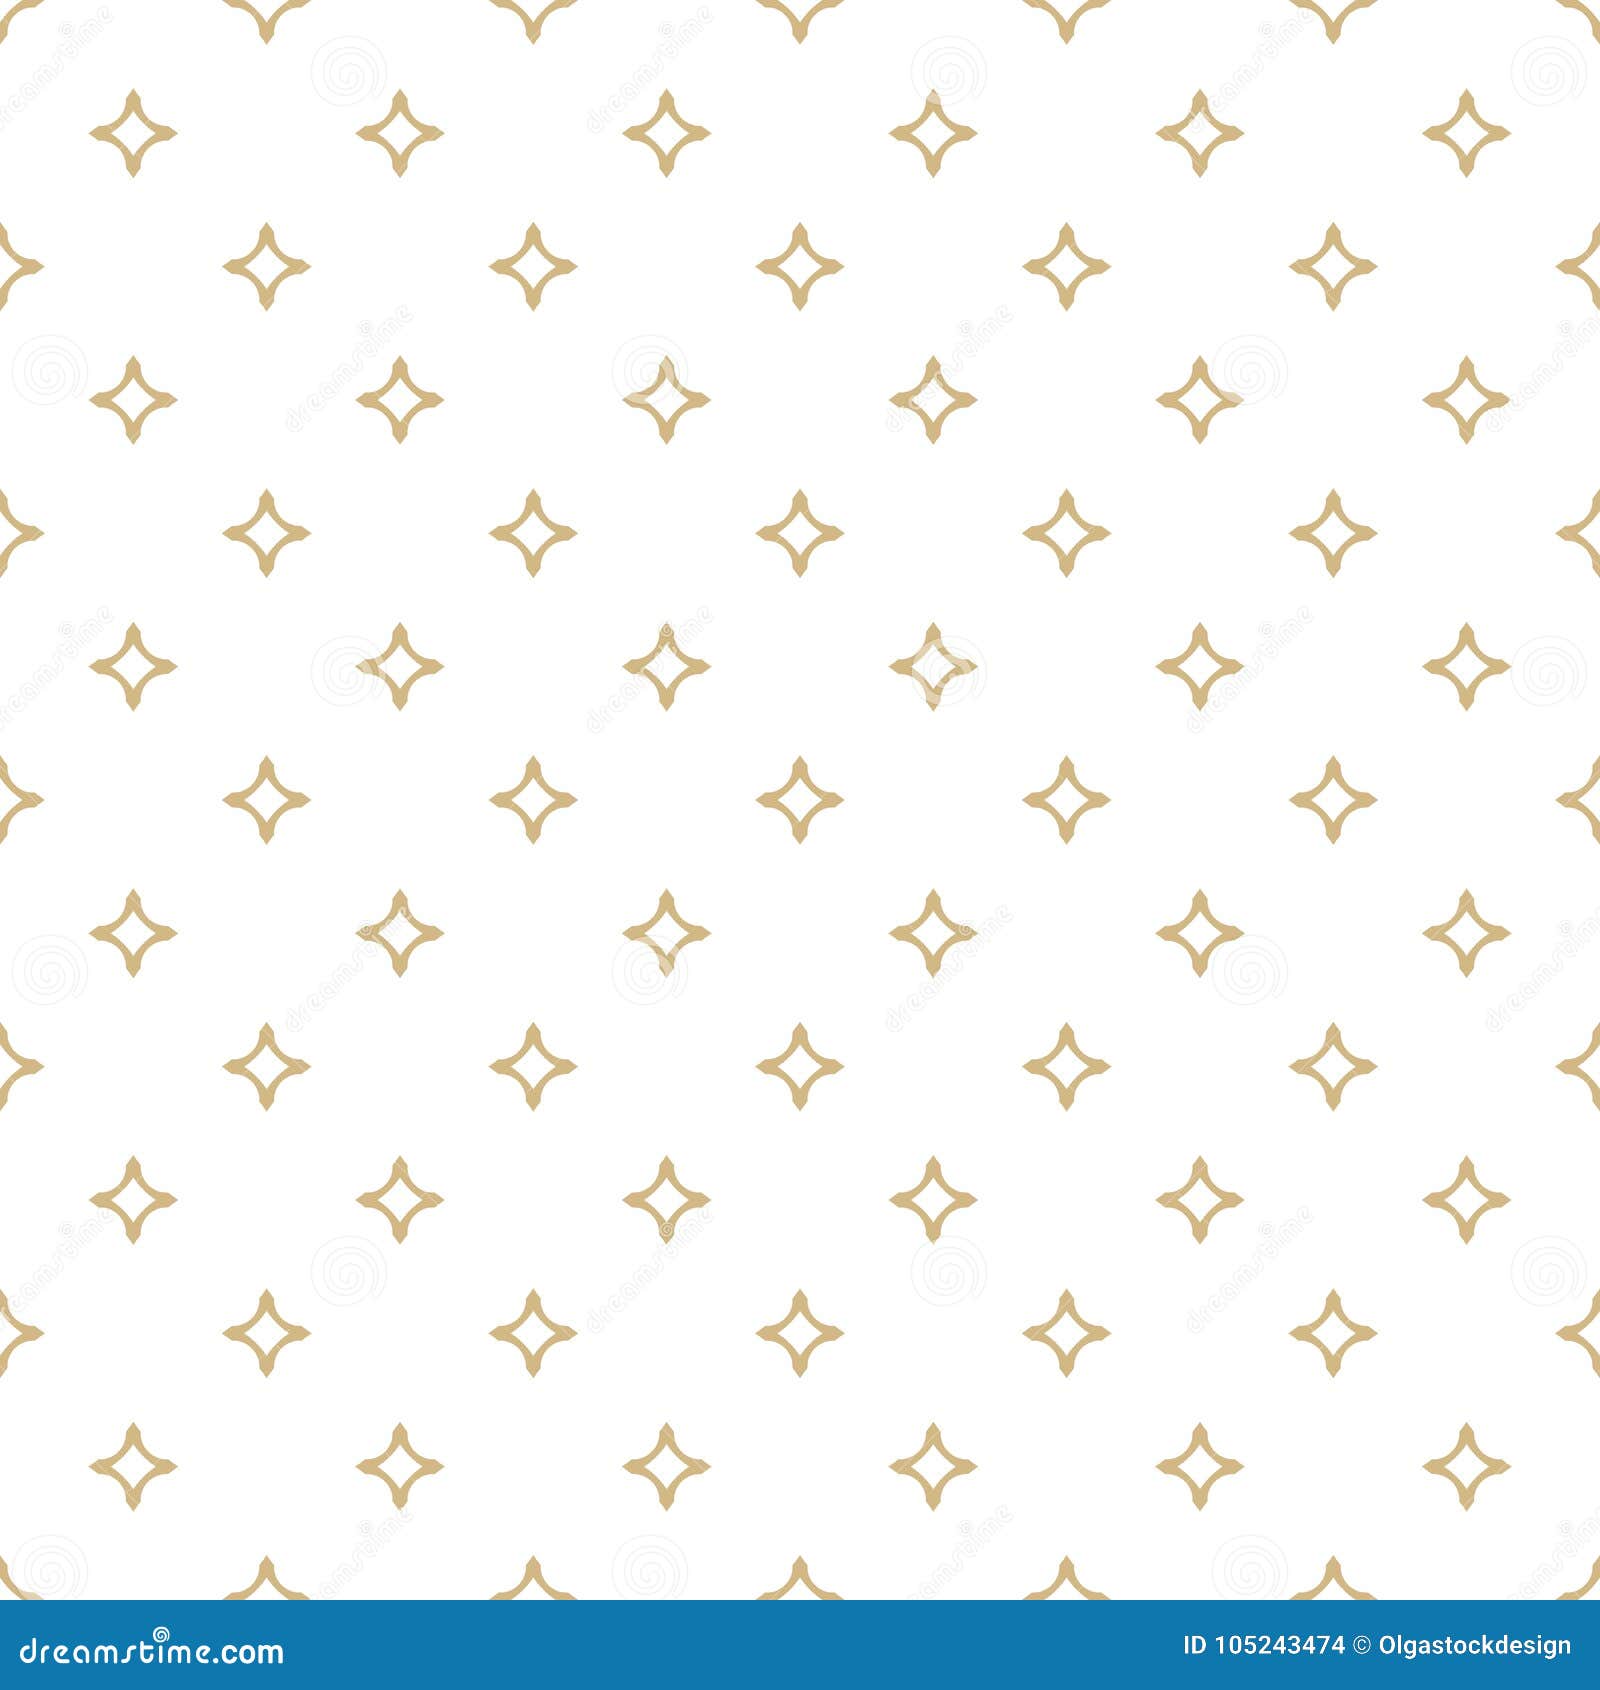 Golden vector seamless pattern with small diamonds, star shapes, rhombuses.  Abstract gold and white geometric texture. Simple minimal wide repeat  background. Luxury design for decor, wallpaper, web Stock Vector